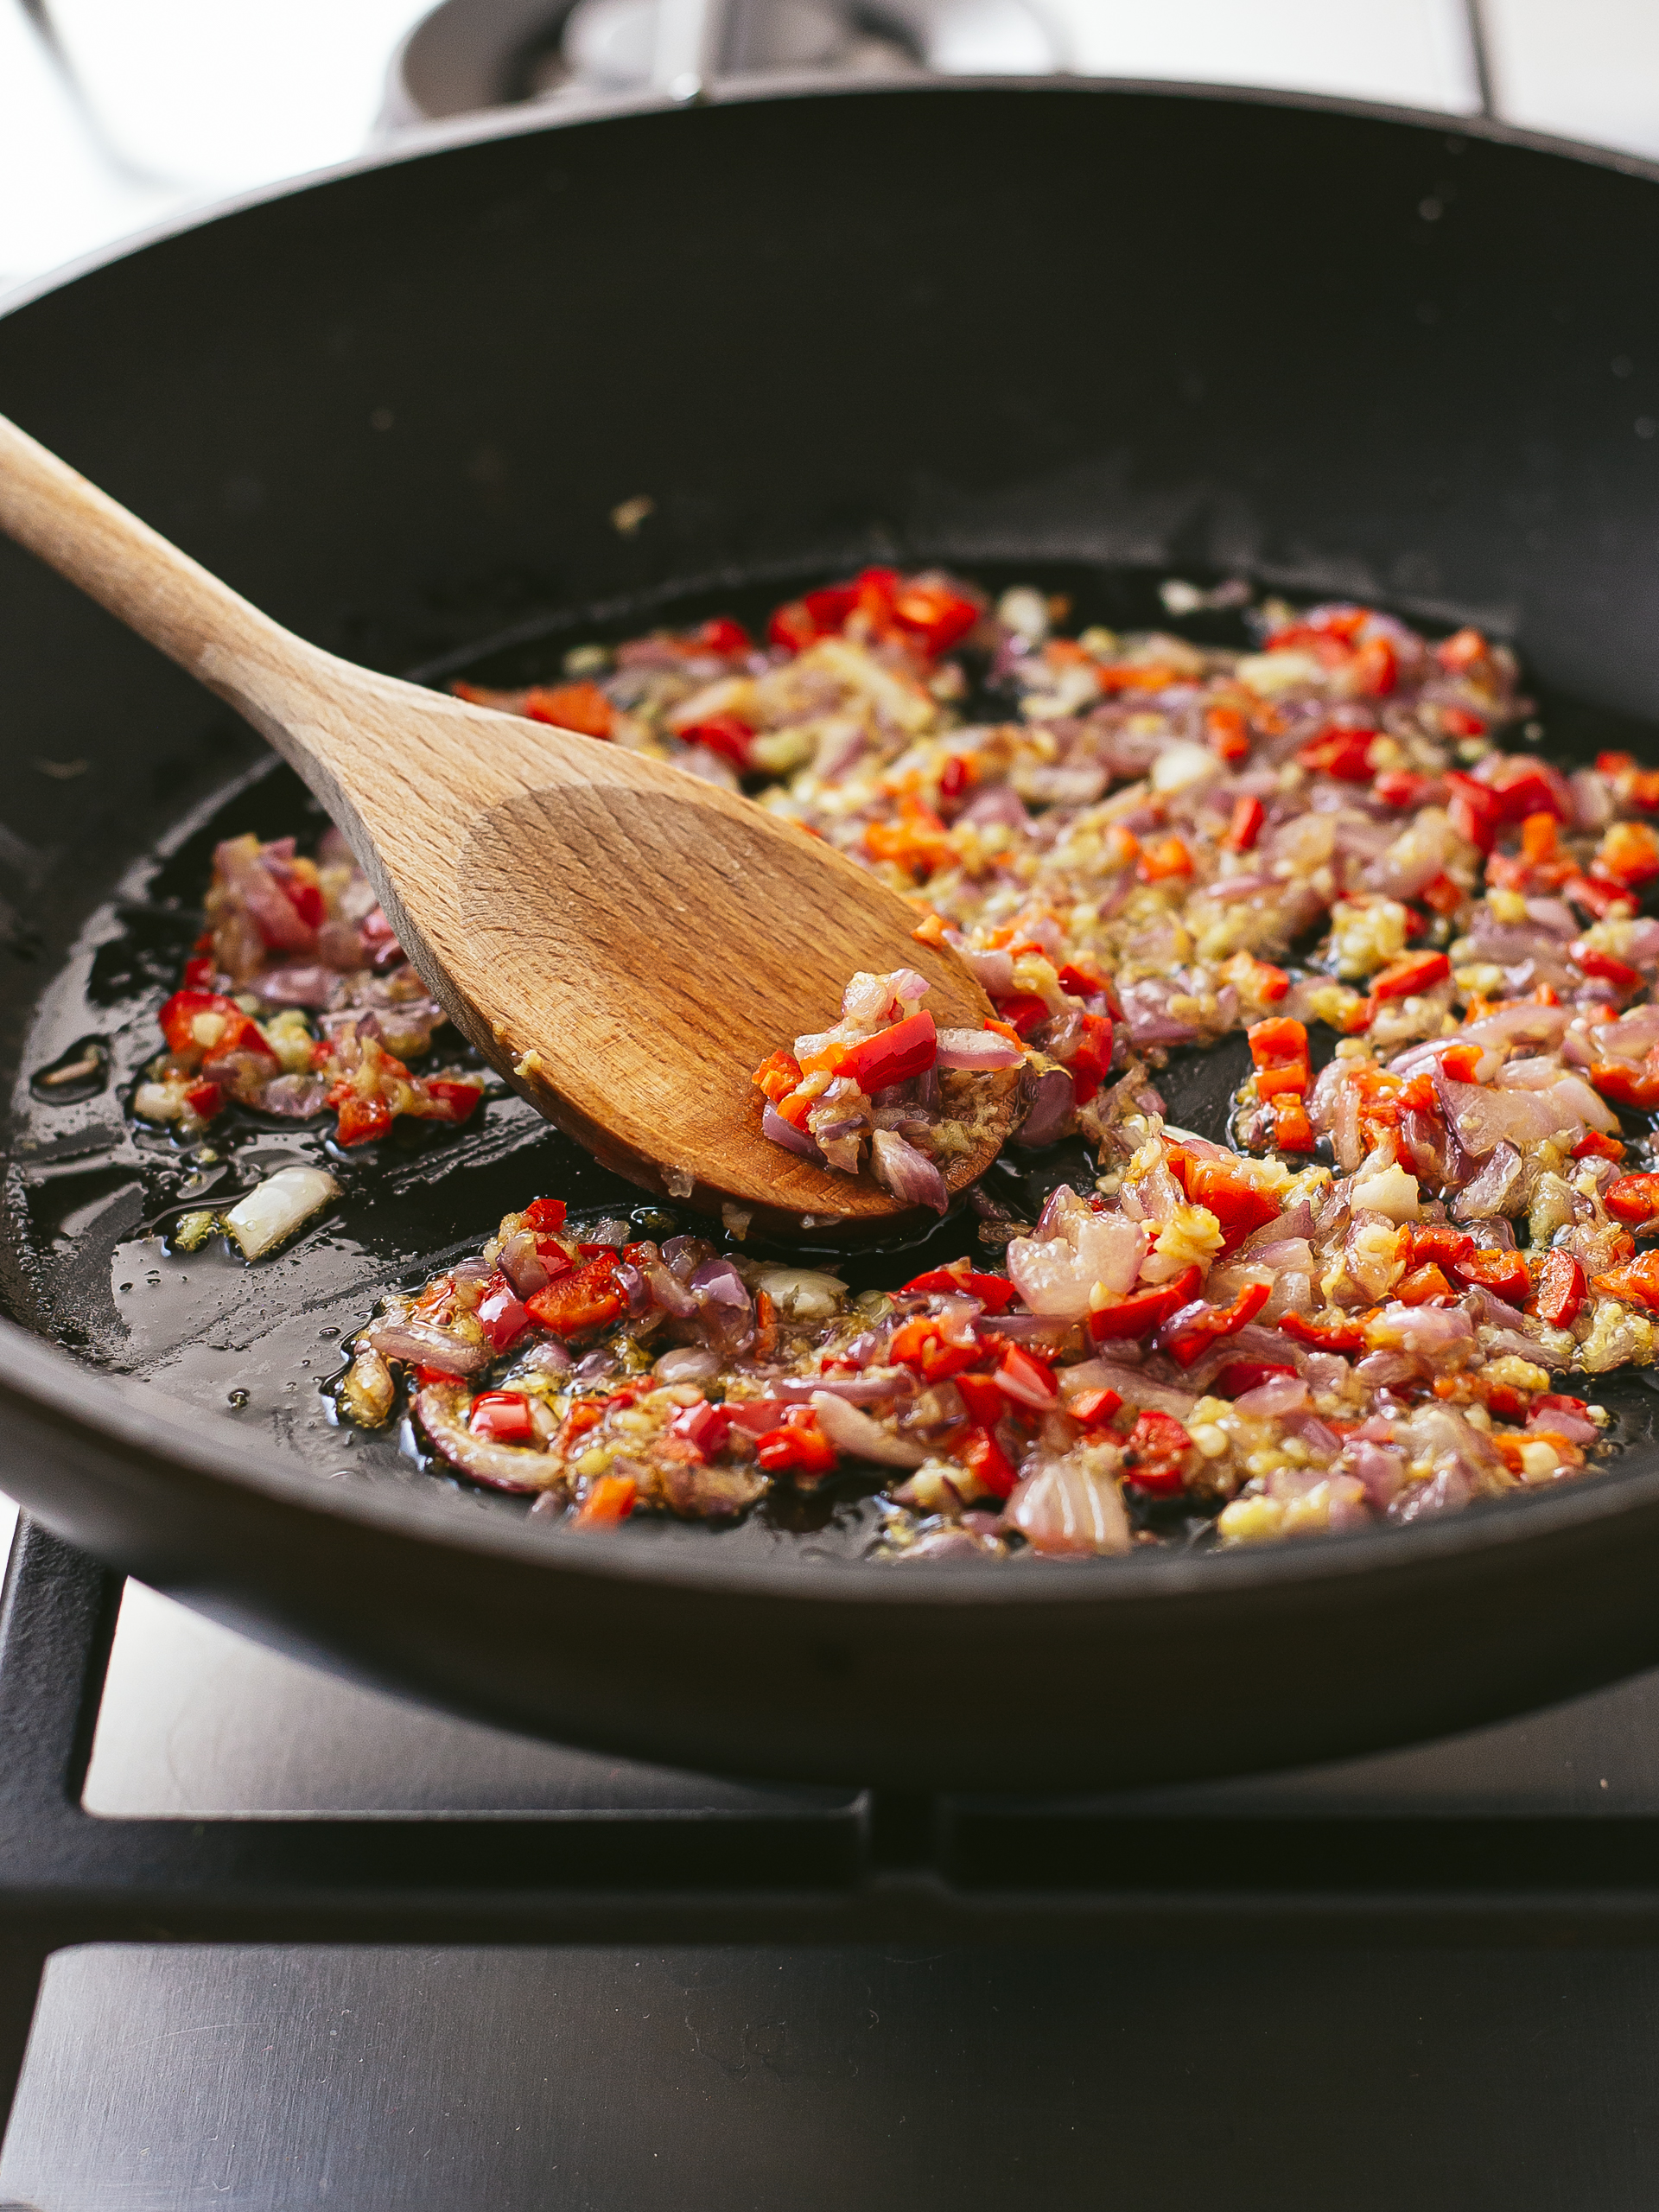 chillies, ginger, garlic, and onions frying in a skillet